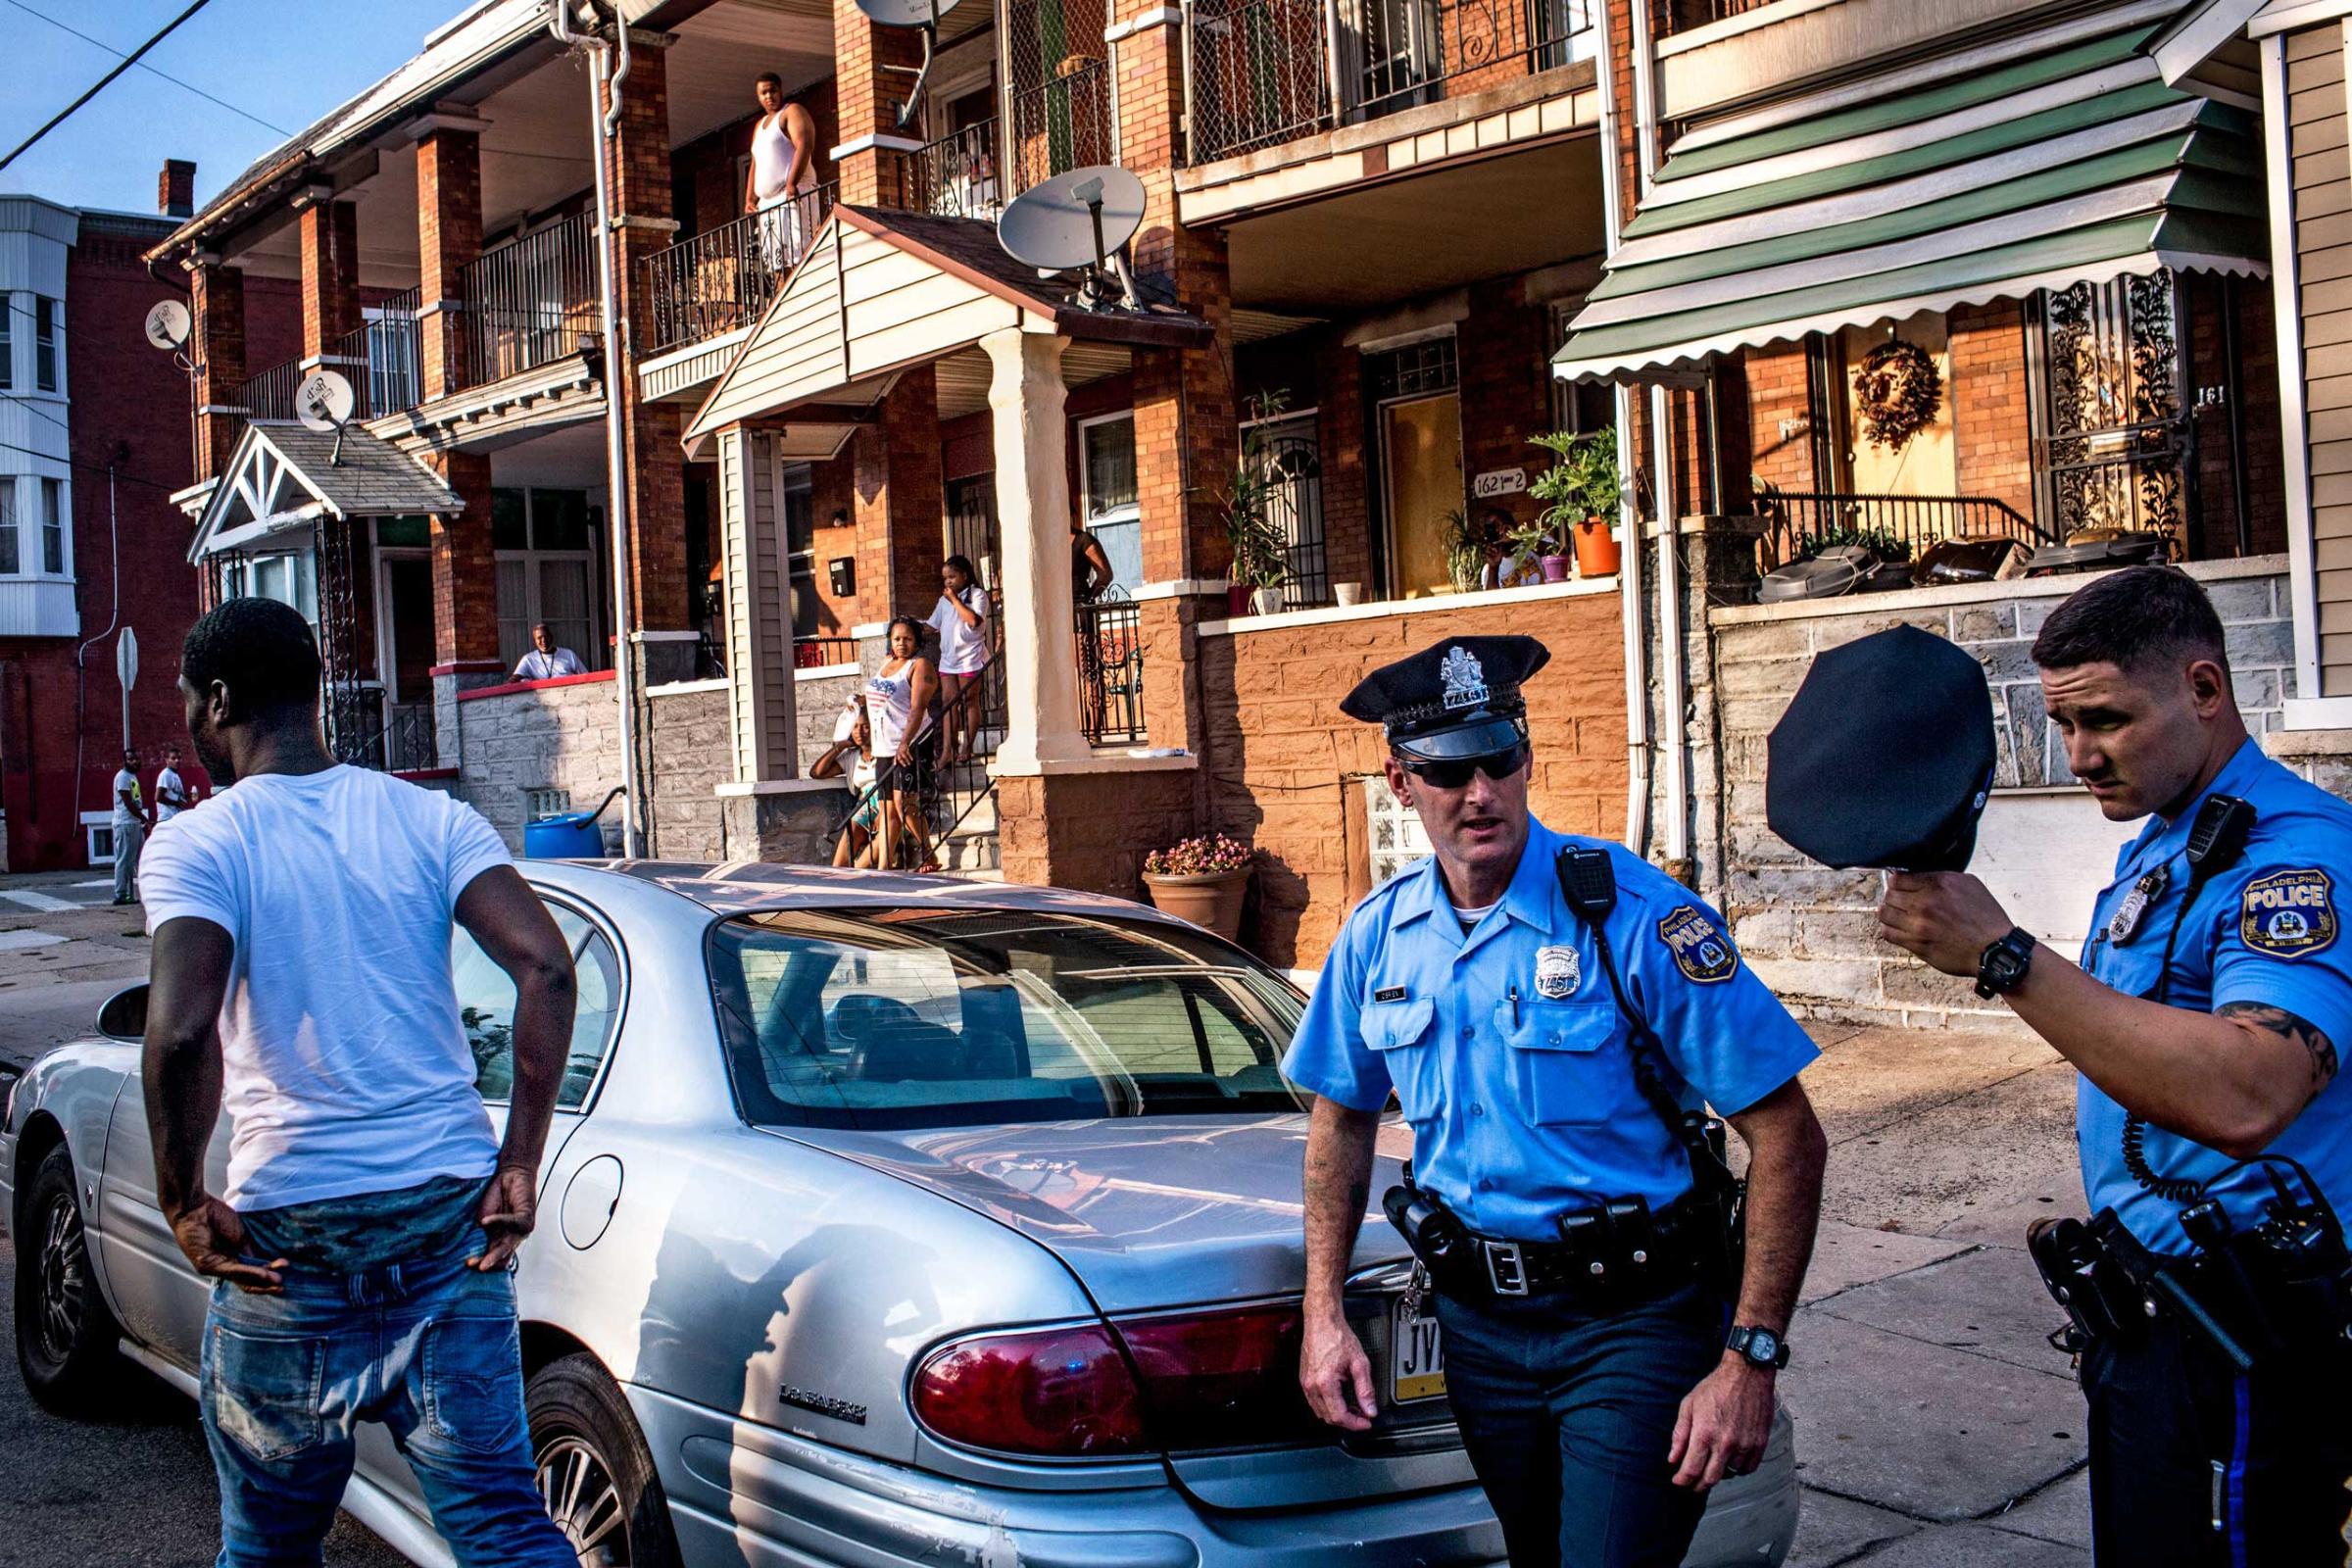 Officers Paul Watson, right, and his partner Officer Richard O'Brien make a traffic stop in Philadelphia, PA., as neighbors look on. After the police searched his car, the man was released. July 29, 2015.